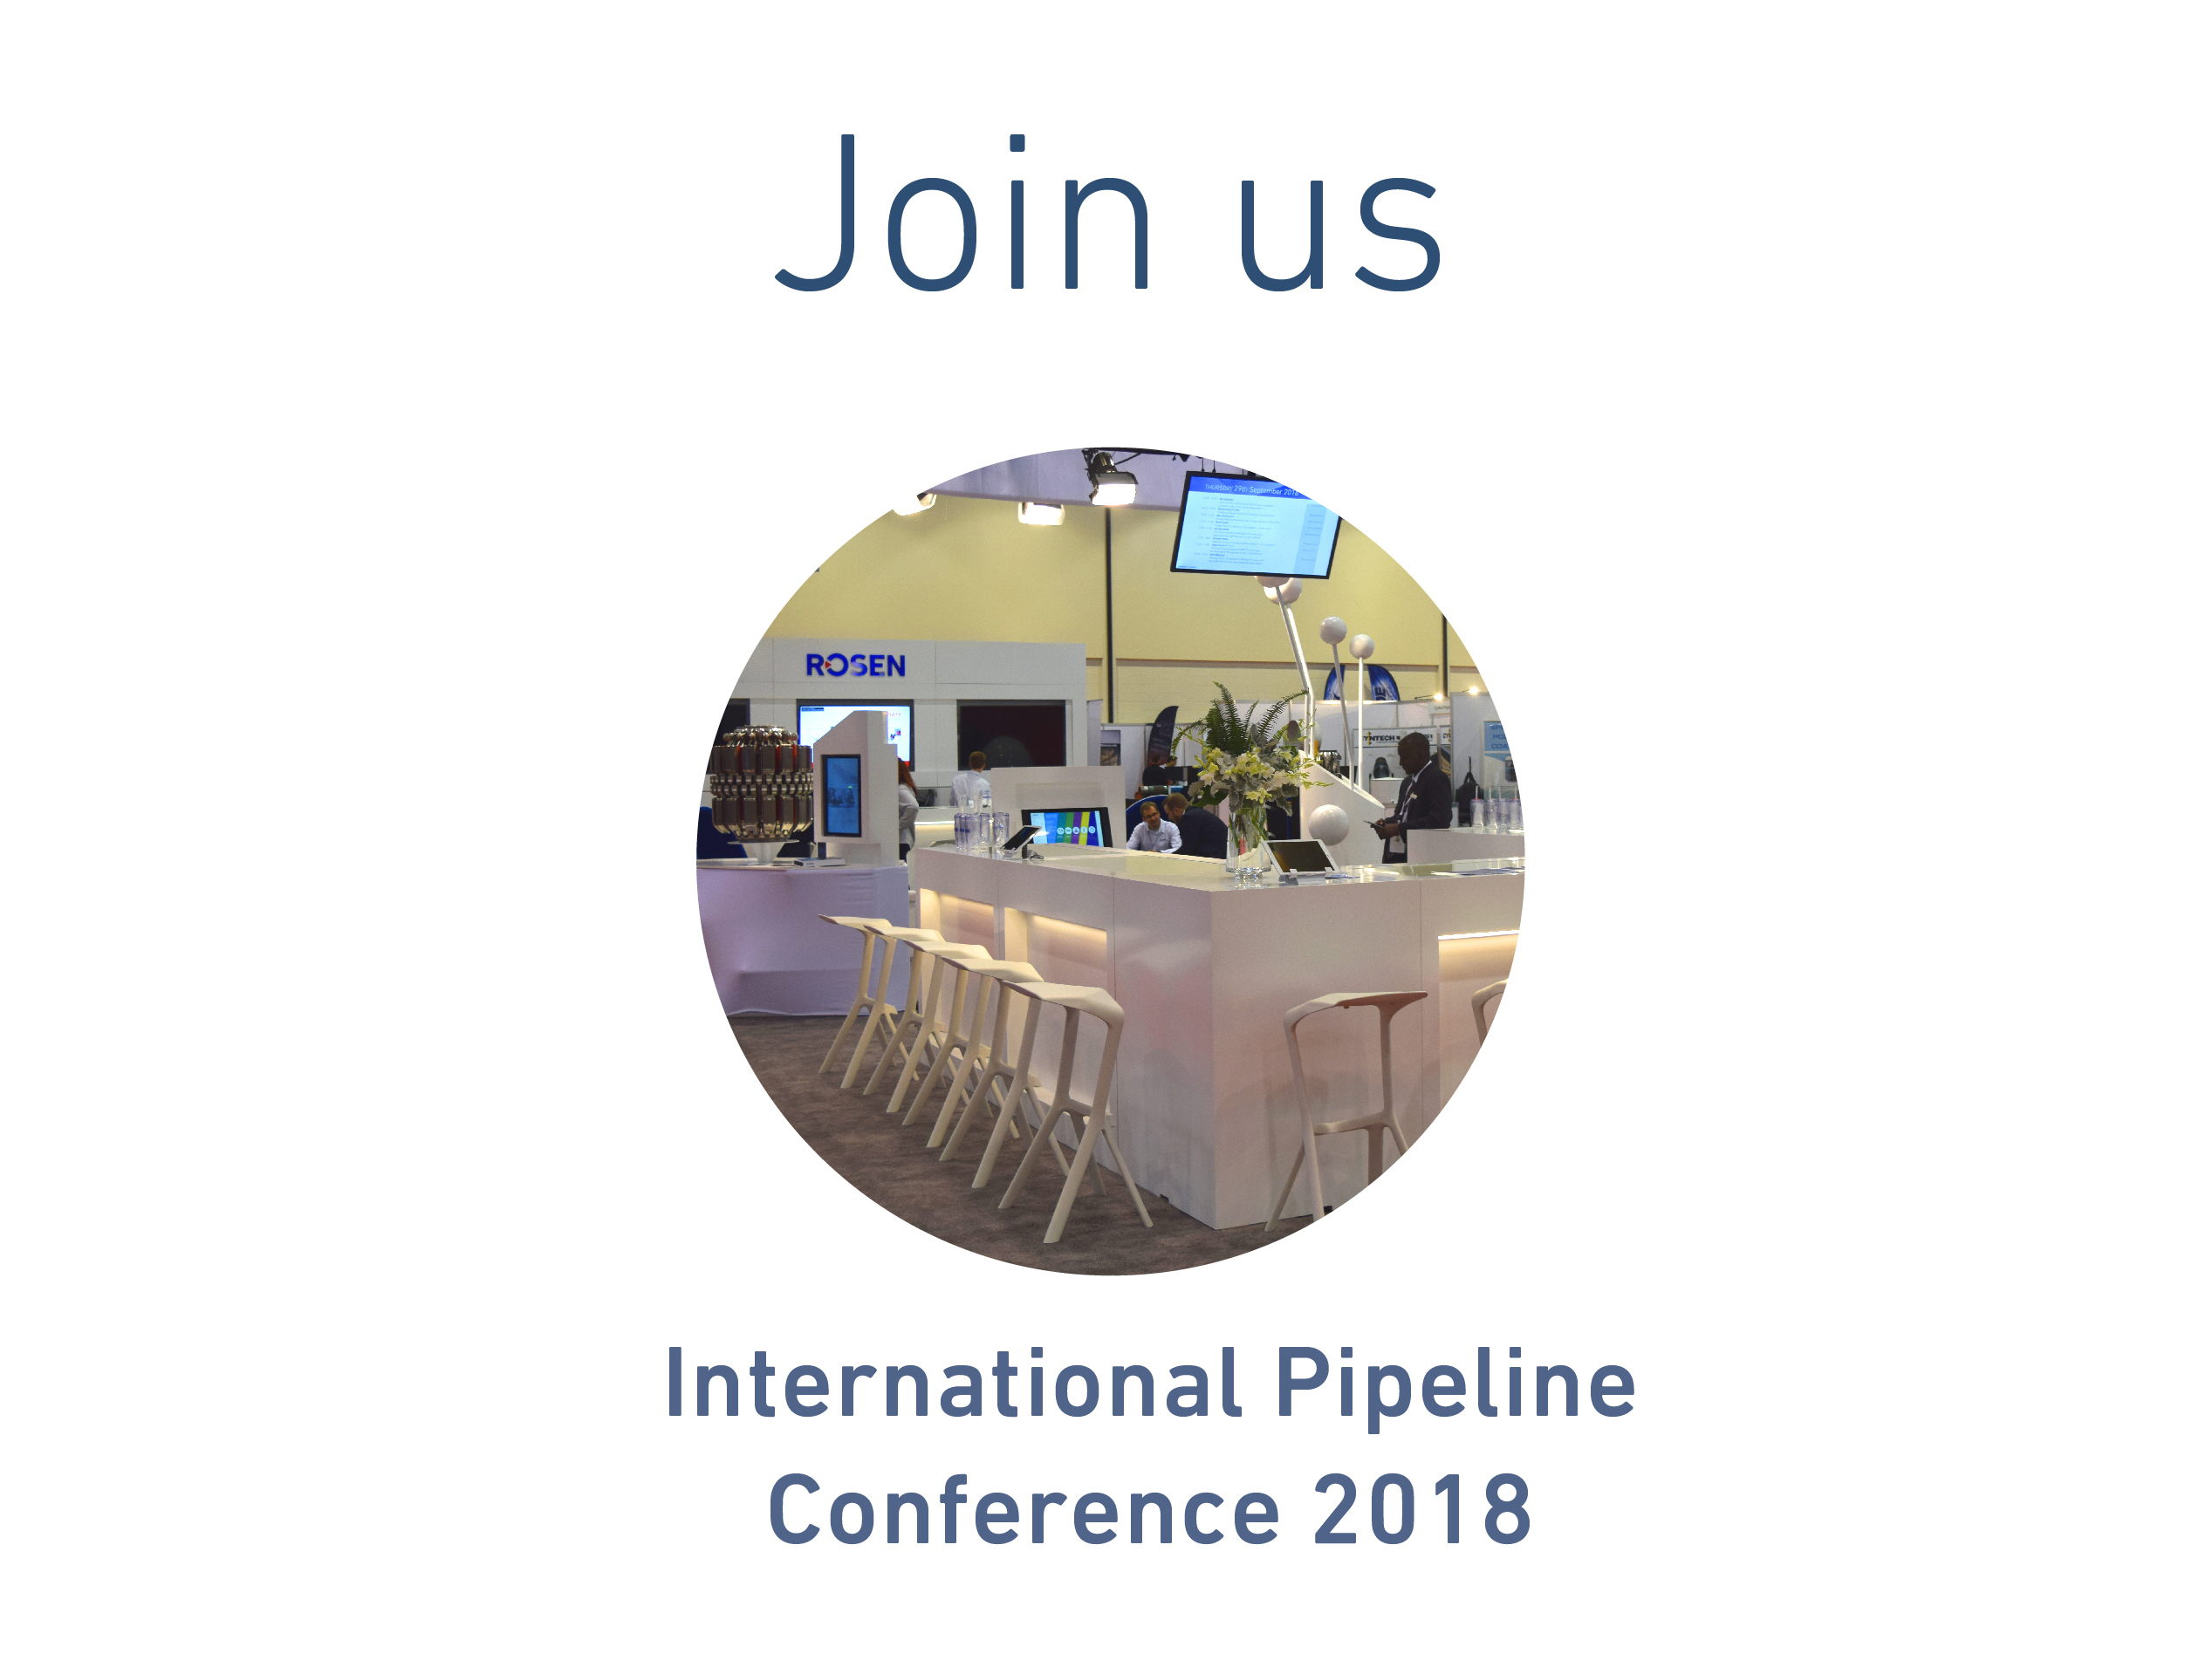 Join us - International Pipeline Conference 2018